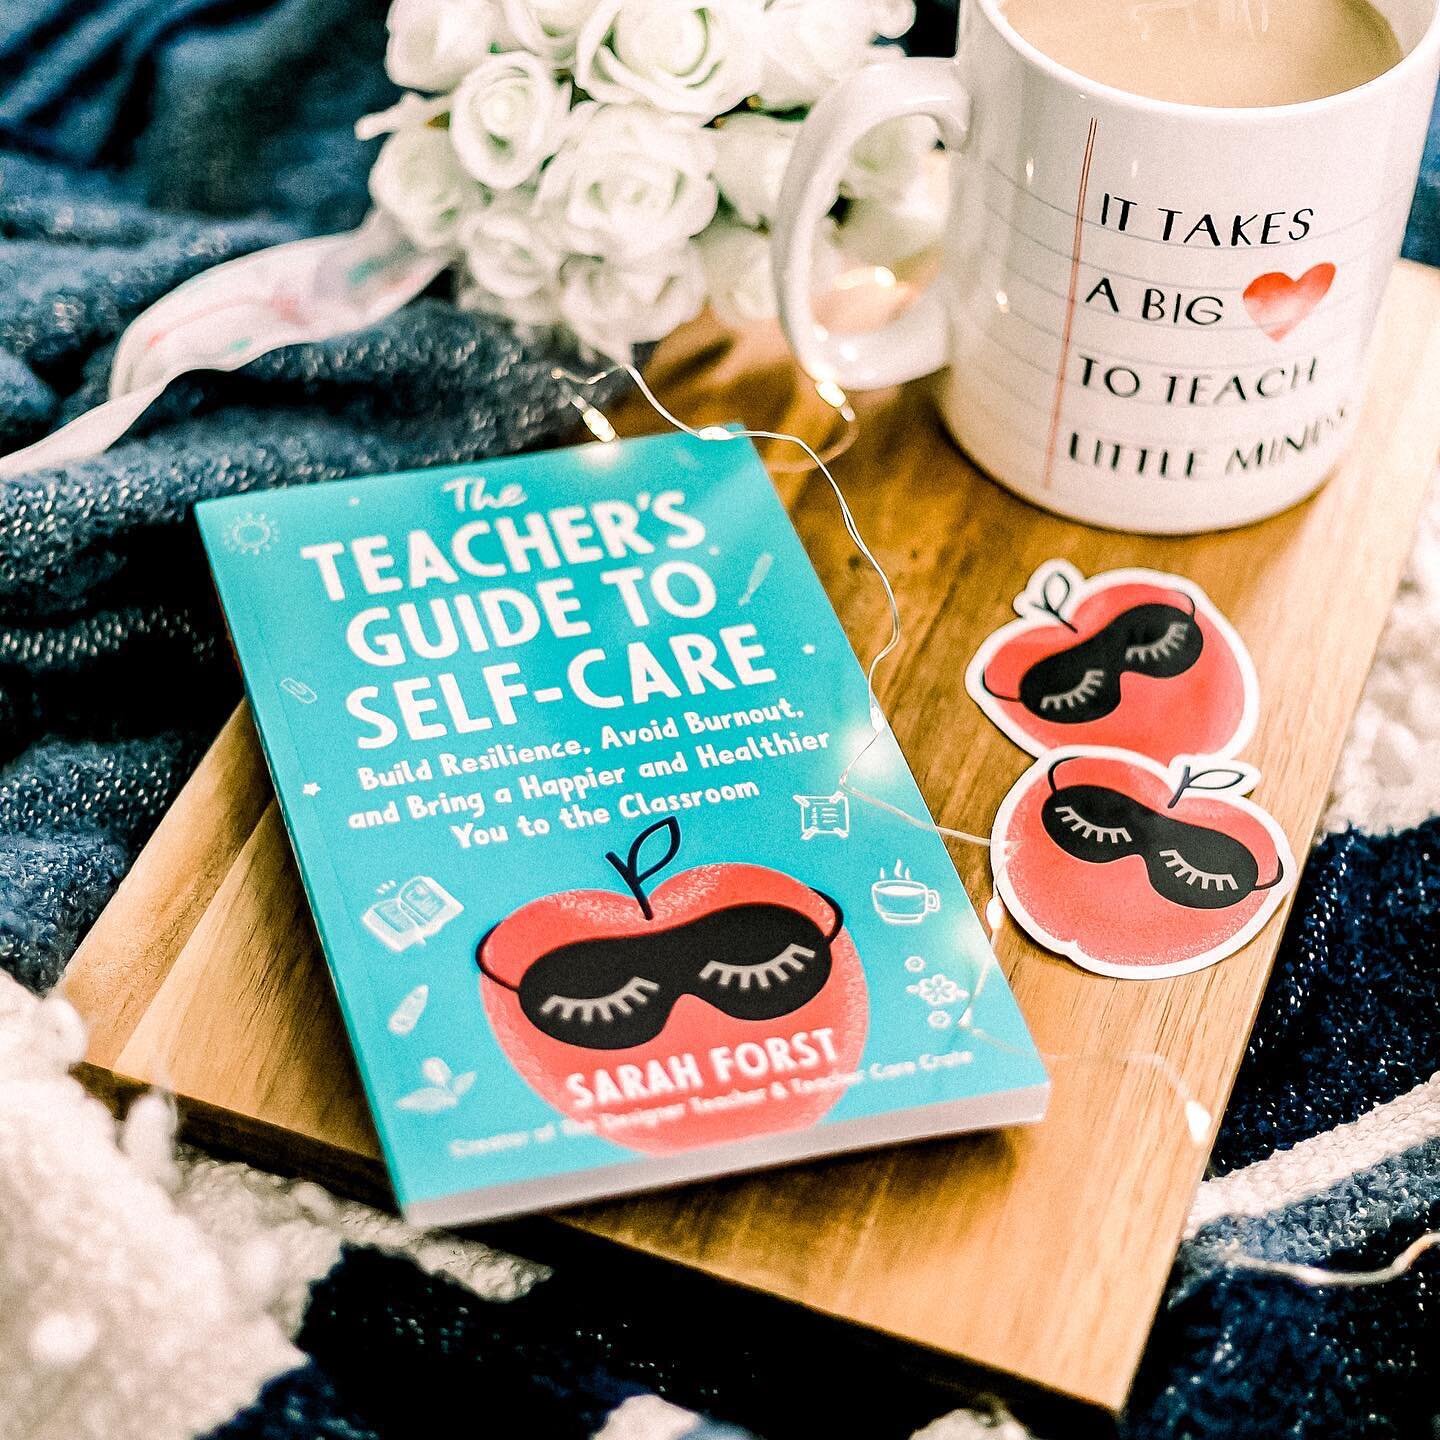 I had a whole multi-paragraph post up earlier about it being The Teacher&rsquo;s Guide to Self-Care&rsquo;s second anniversary and now it&rsquo;s just&hellip; gone? And it&rsquo;s 9:30 and I&rsquo;m the parent of #twoundertwo so I&rsquo;m not writing